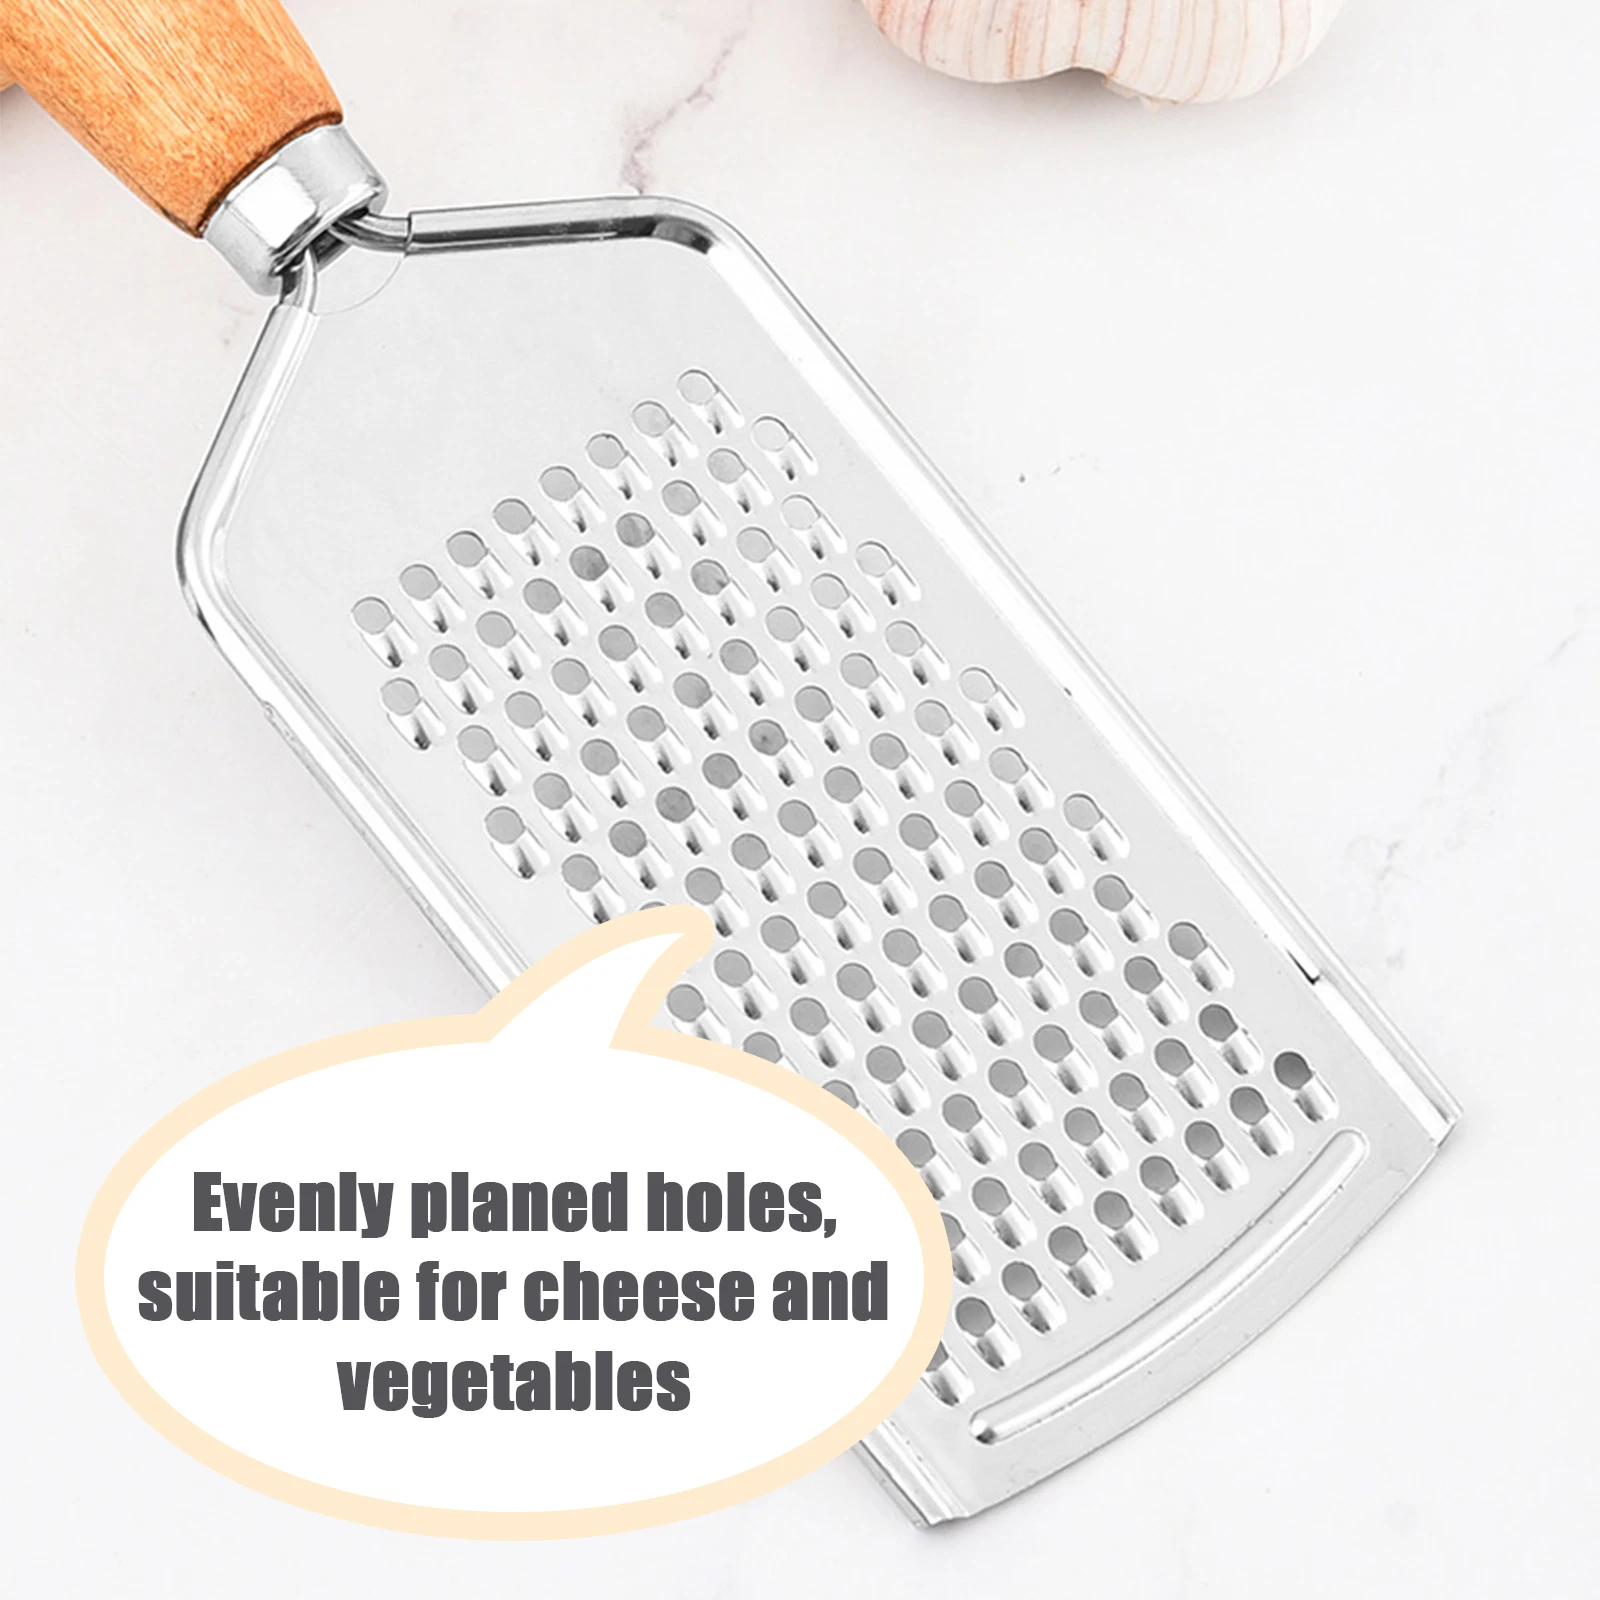 https://ae01.alicdn.com/kf/Hdbf73053dbf44e2cb7c4a4333e09699f3/Stainless-Steel-Handheld-Cheese-Grater-Multi-Purpose-Kitchen-Food-Graters-For-Cheese-Chocolate-Butter-Fruit-Vegetable.jpg